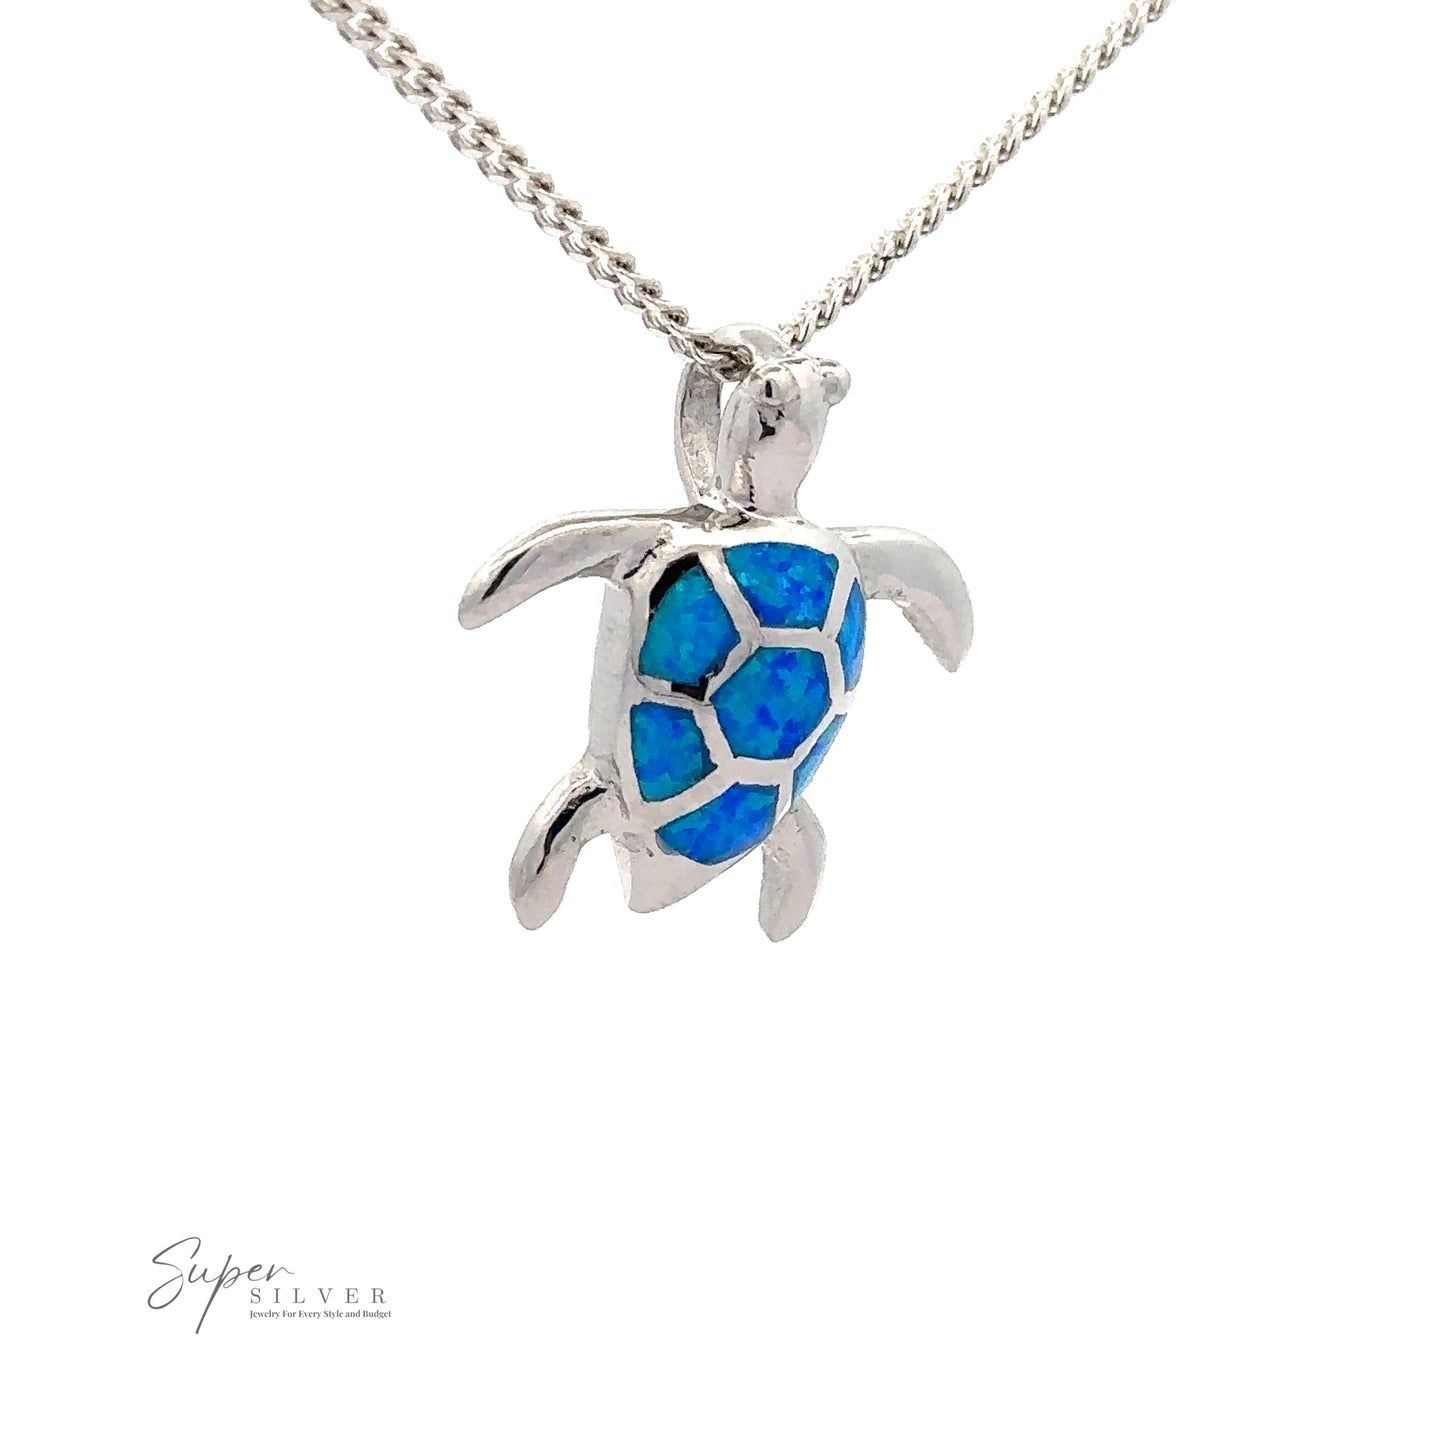 A sterling silver necklace featuring an Opal Sea Turtle Pendant.